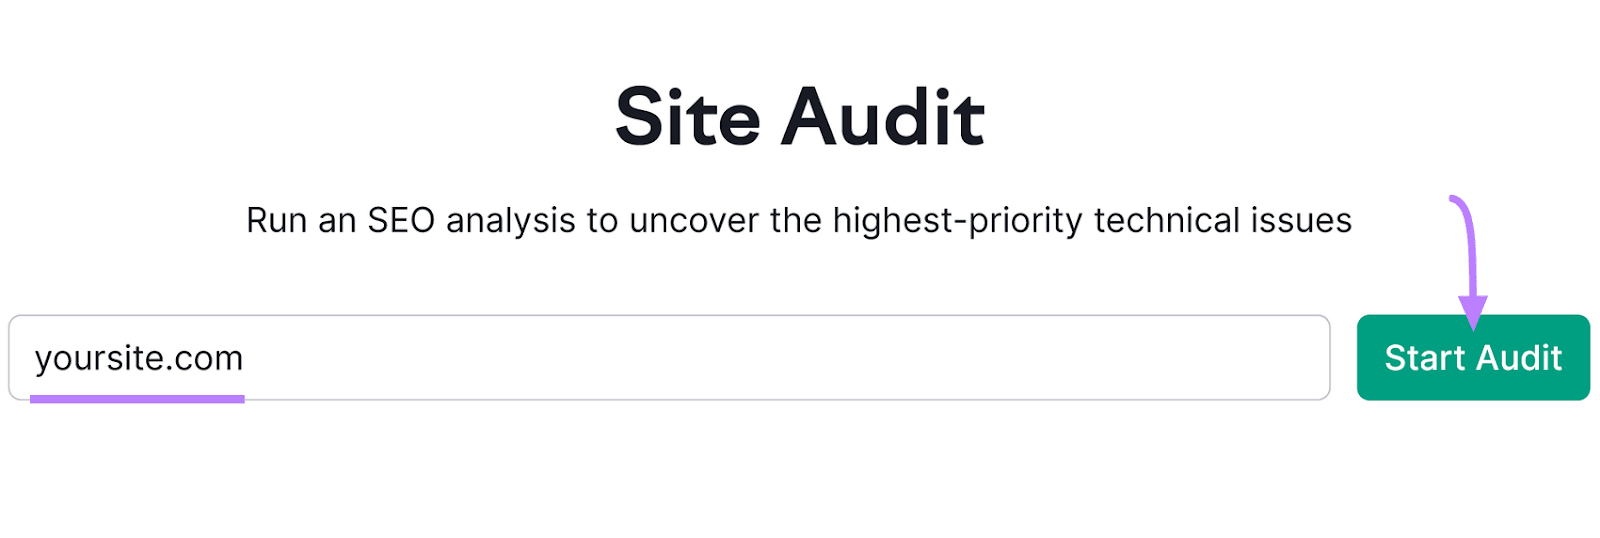 "Site Audit" tool with "yoursite.com" in search field and a green "Start Audit" button with a purple arrow pointing to it.